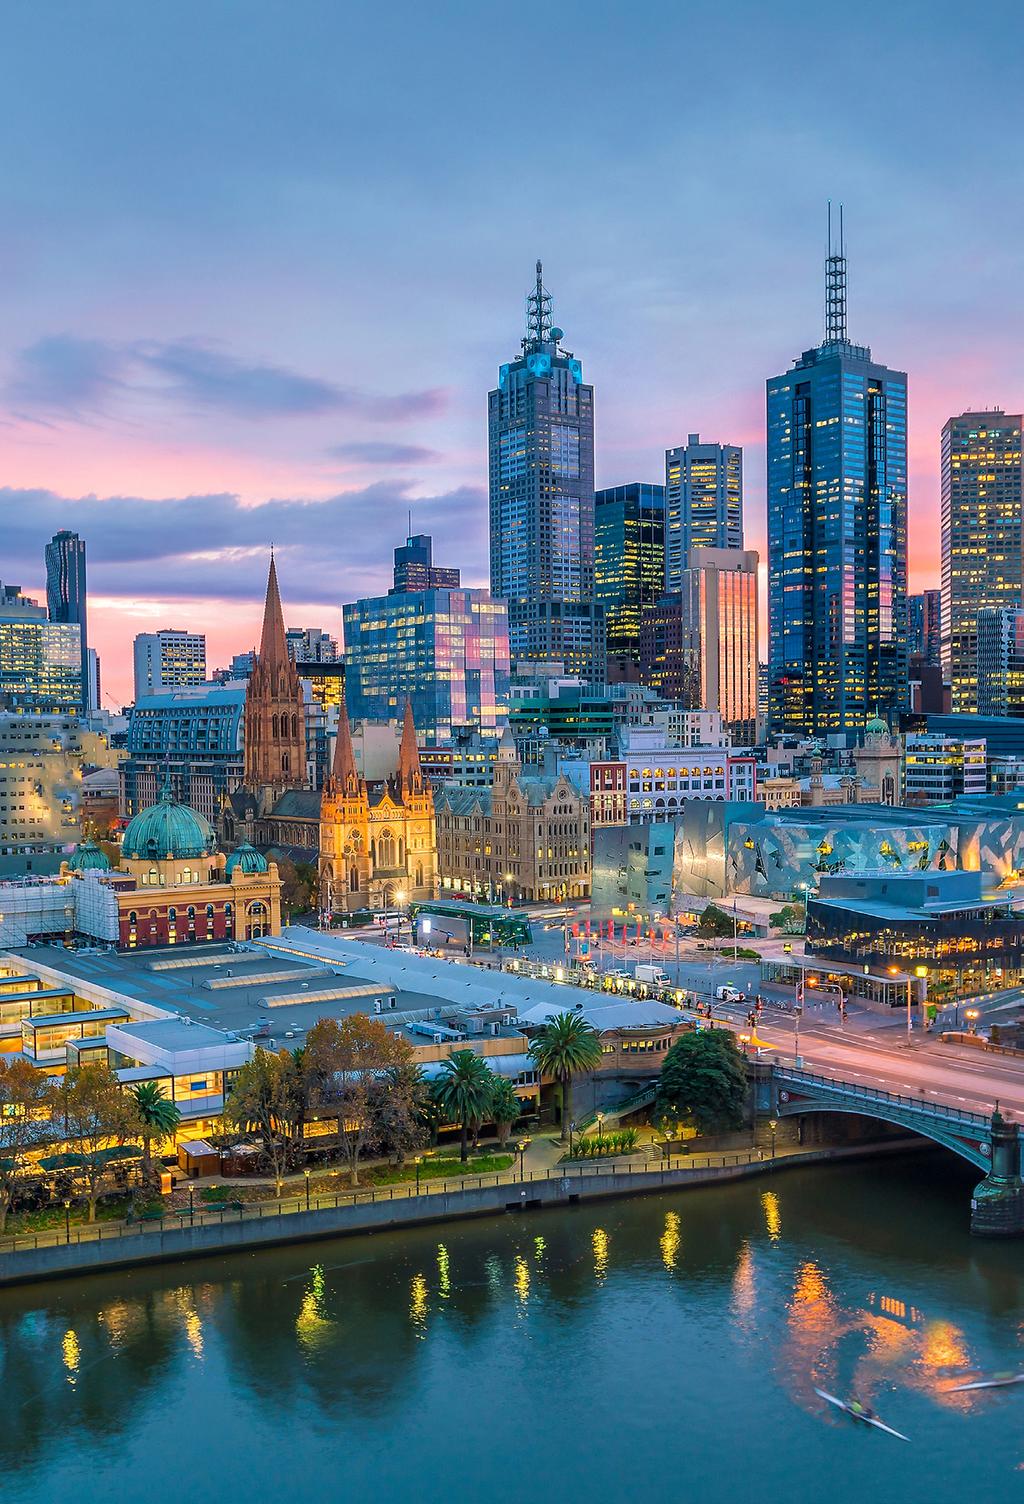 Overview Melbourne receives over 12.4 million overnight visitors from domestic and international markets per year.